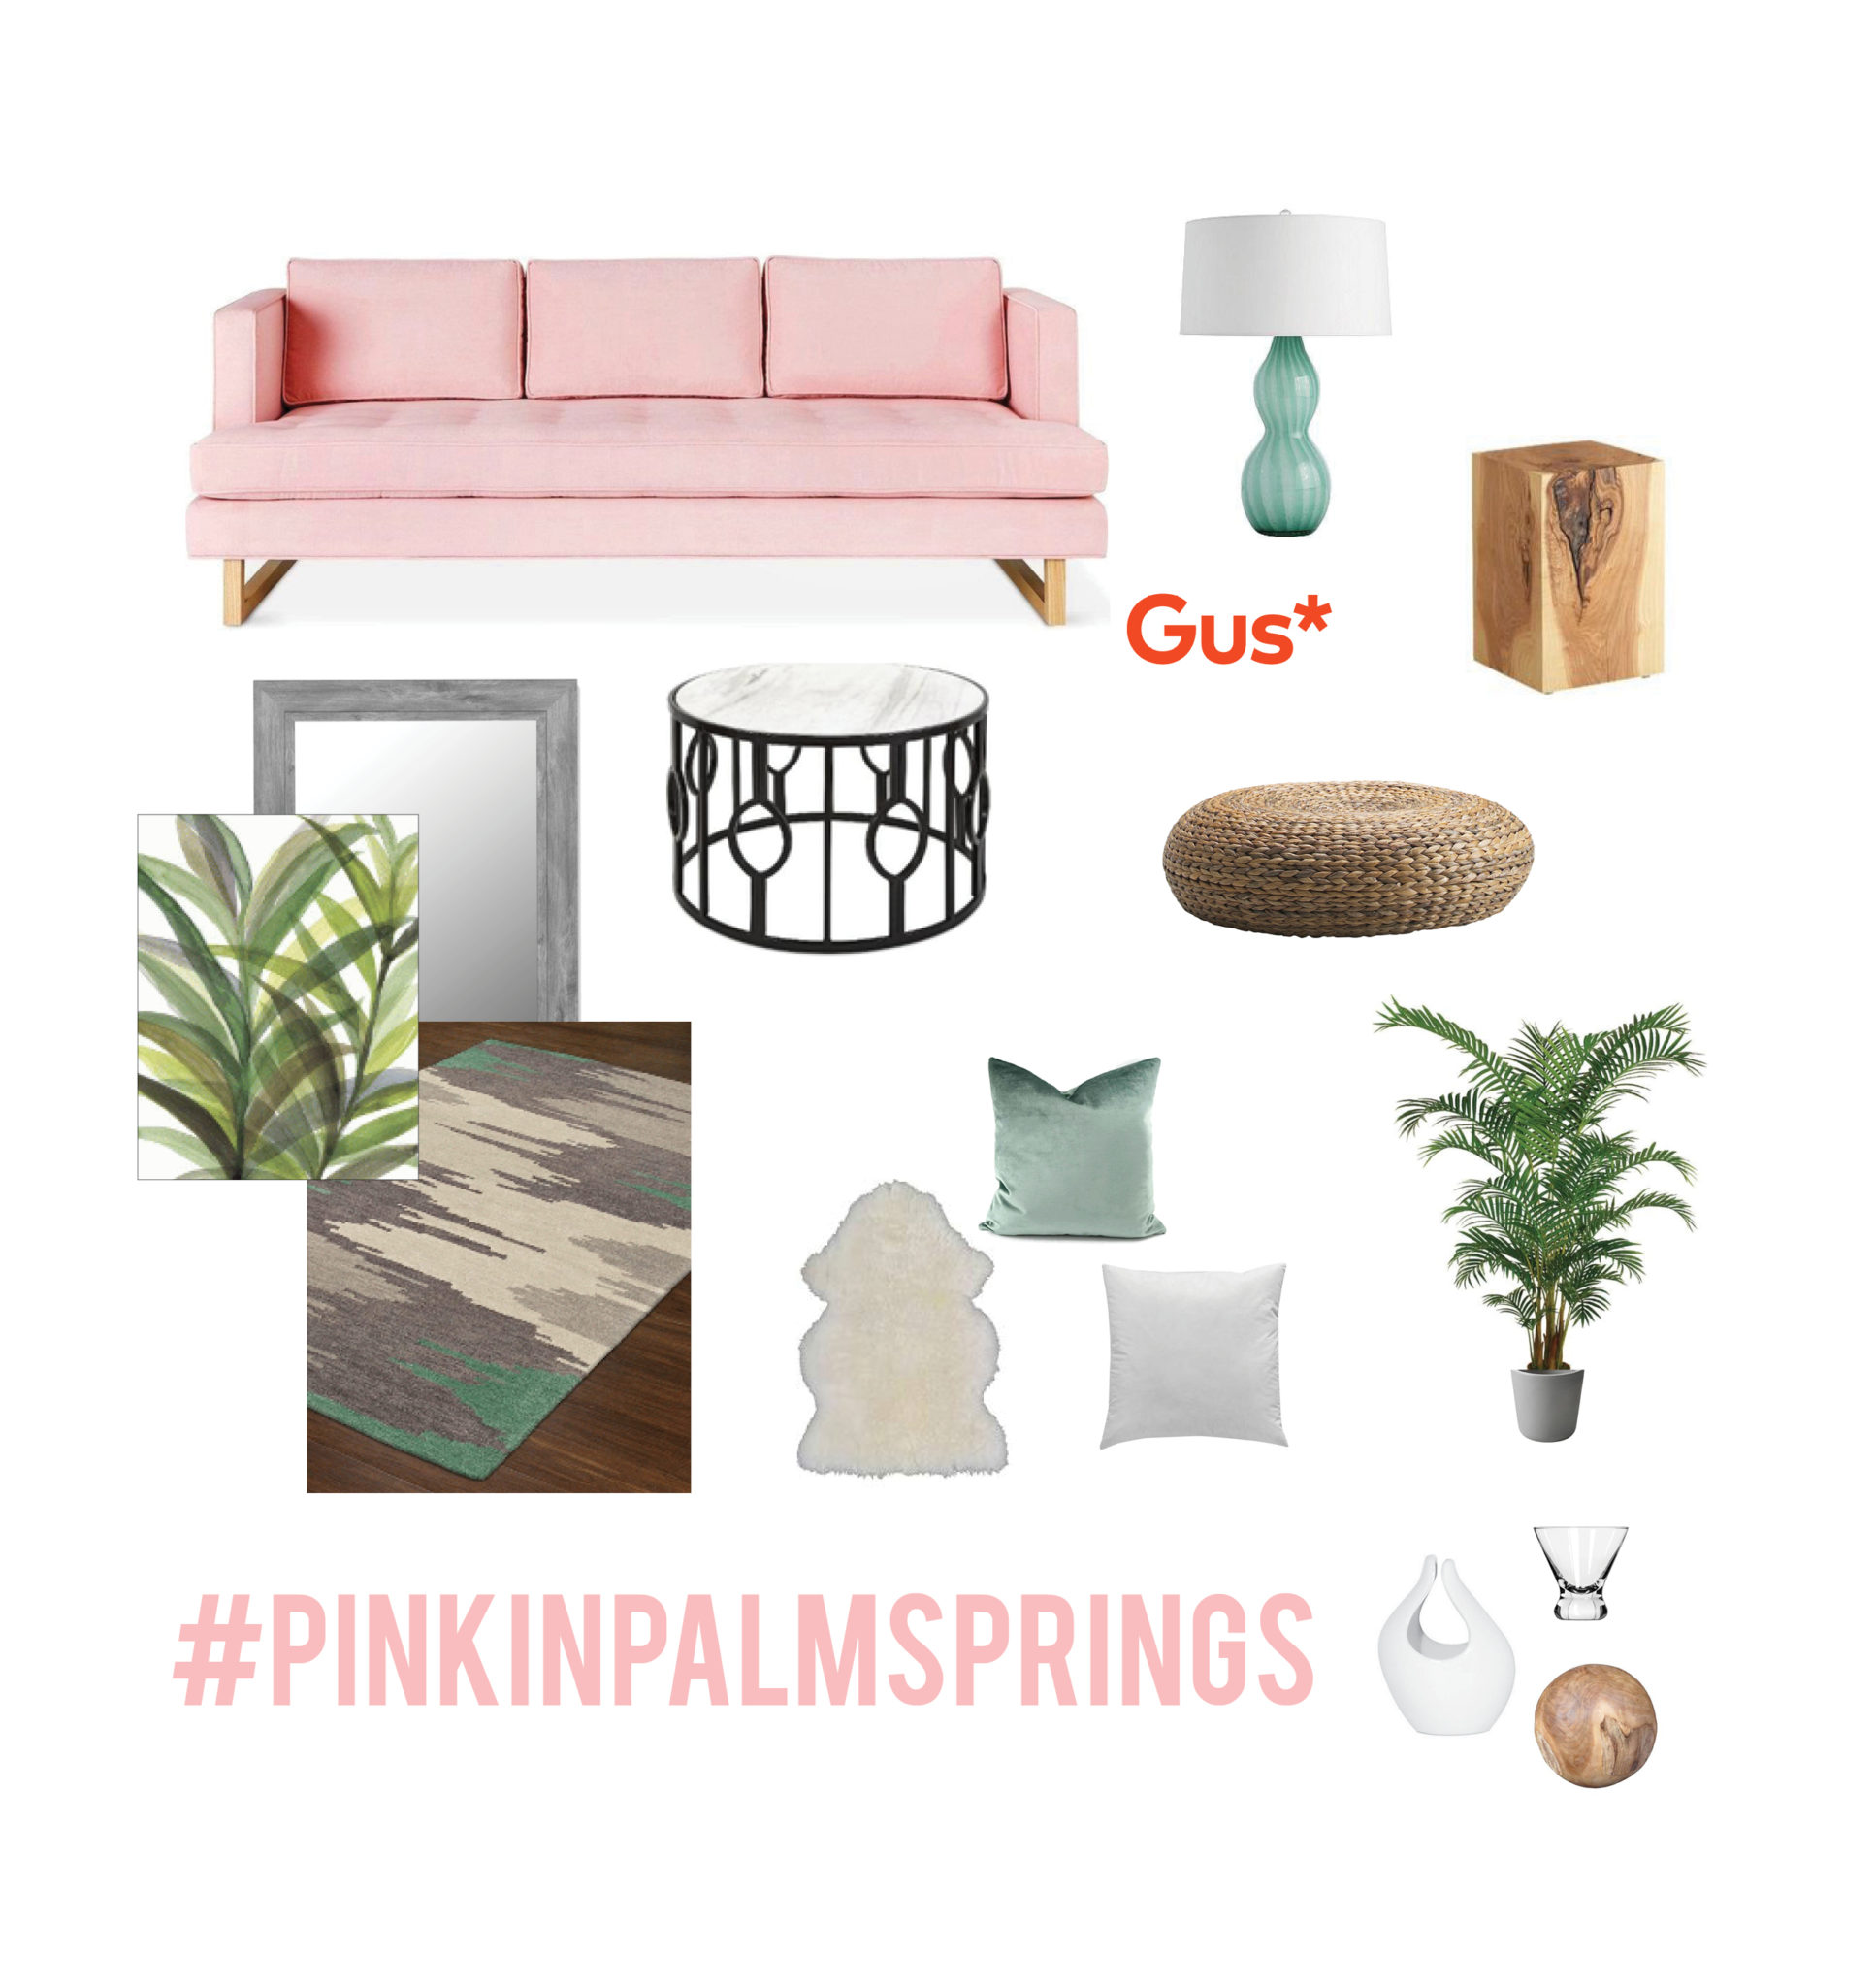 furniture and accessories in white, pink and green